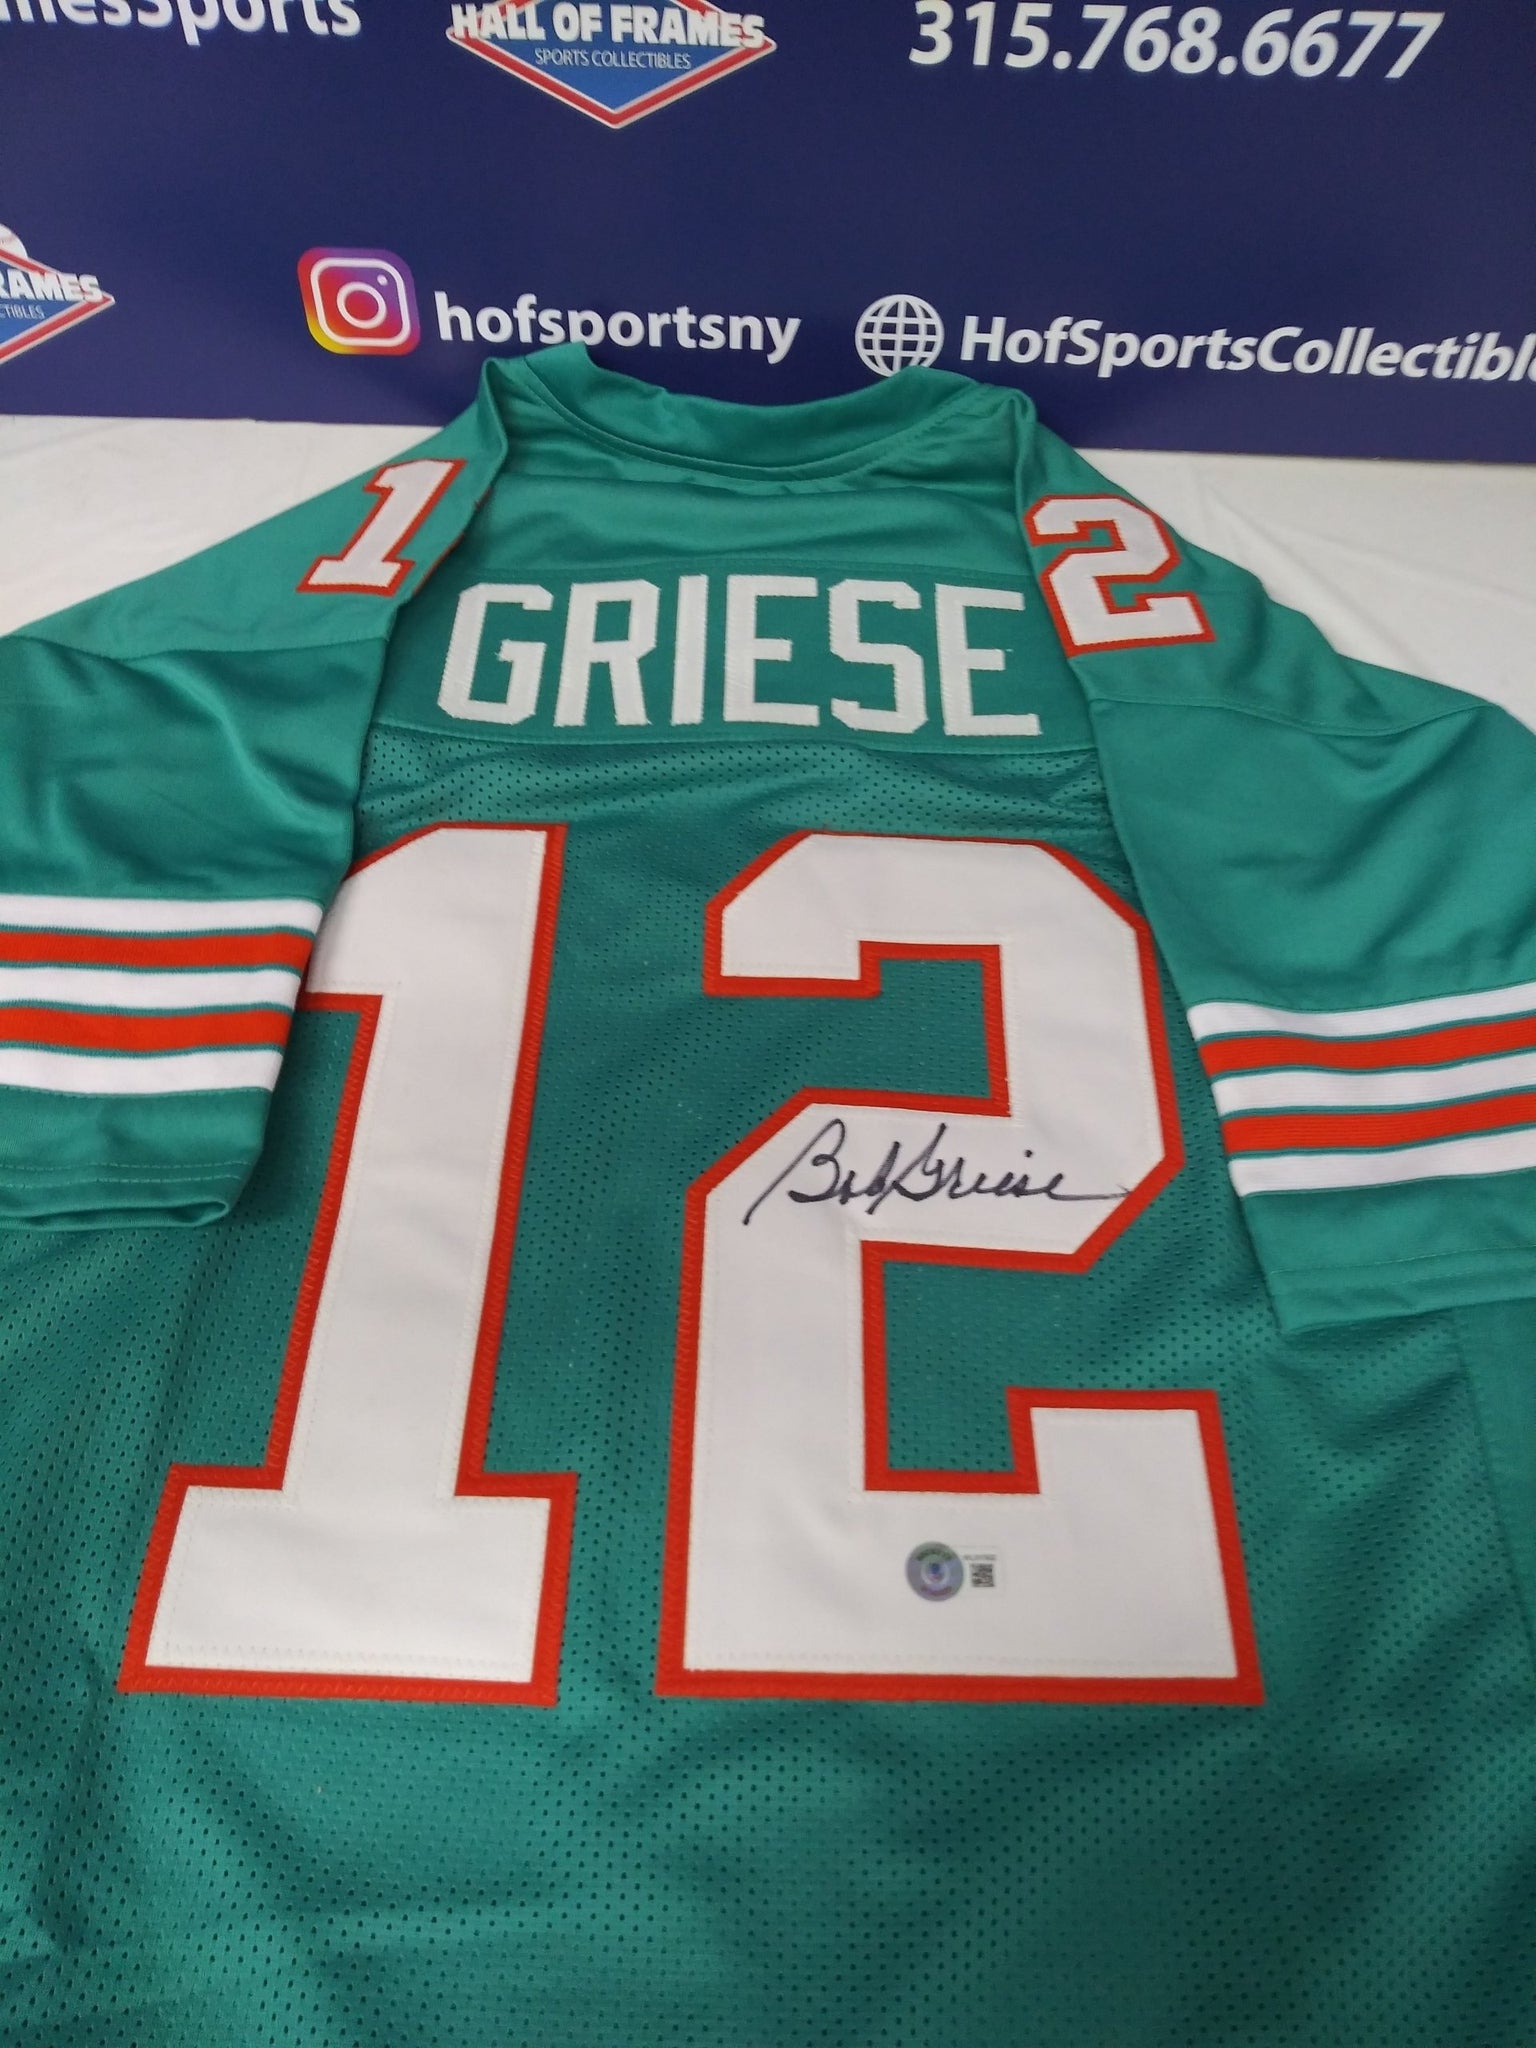 BOB GRIESE SIGNED MIAMI DOLPHINS CUSTOM JERSEY - BECKETT